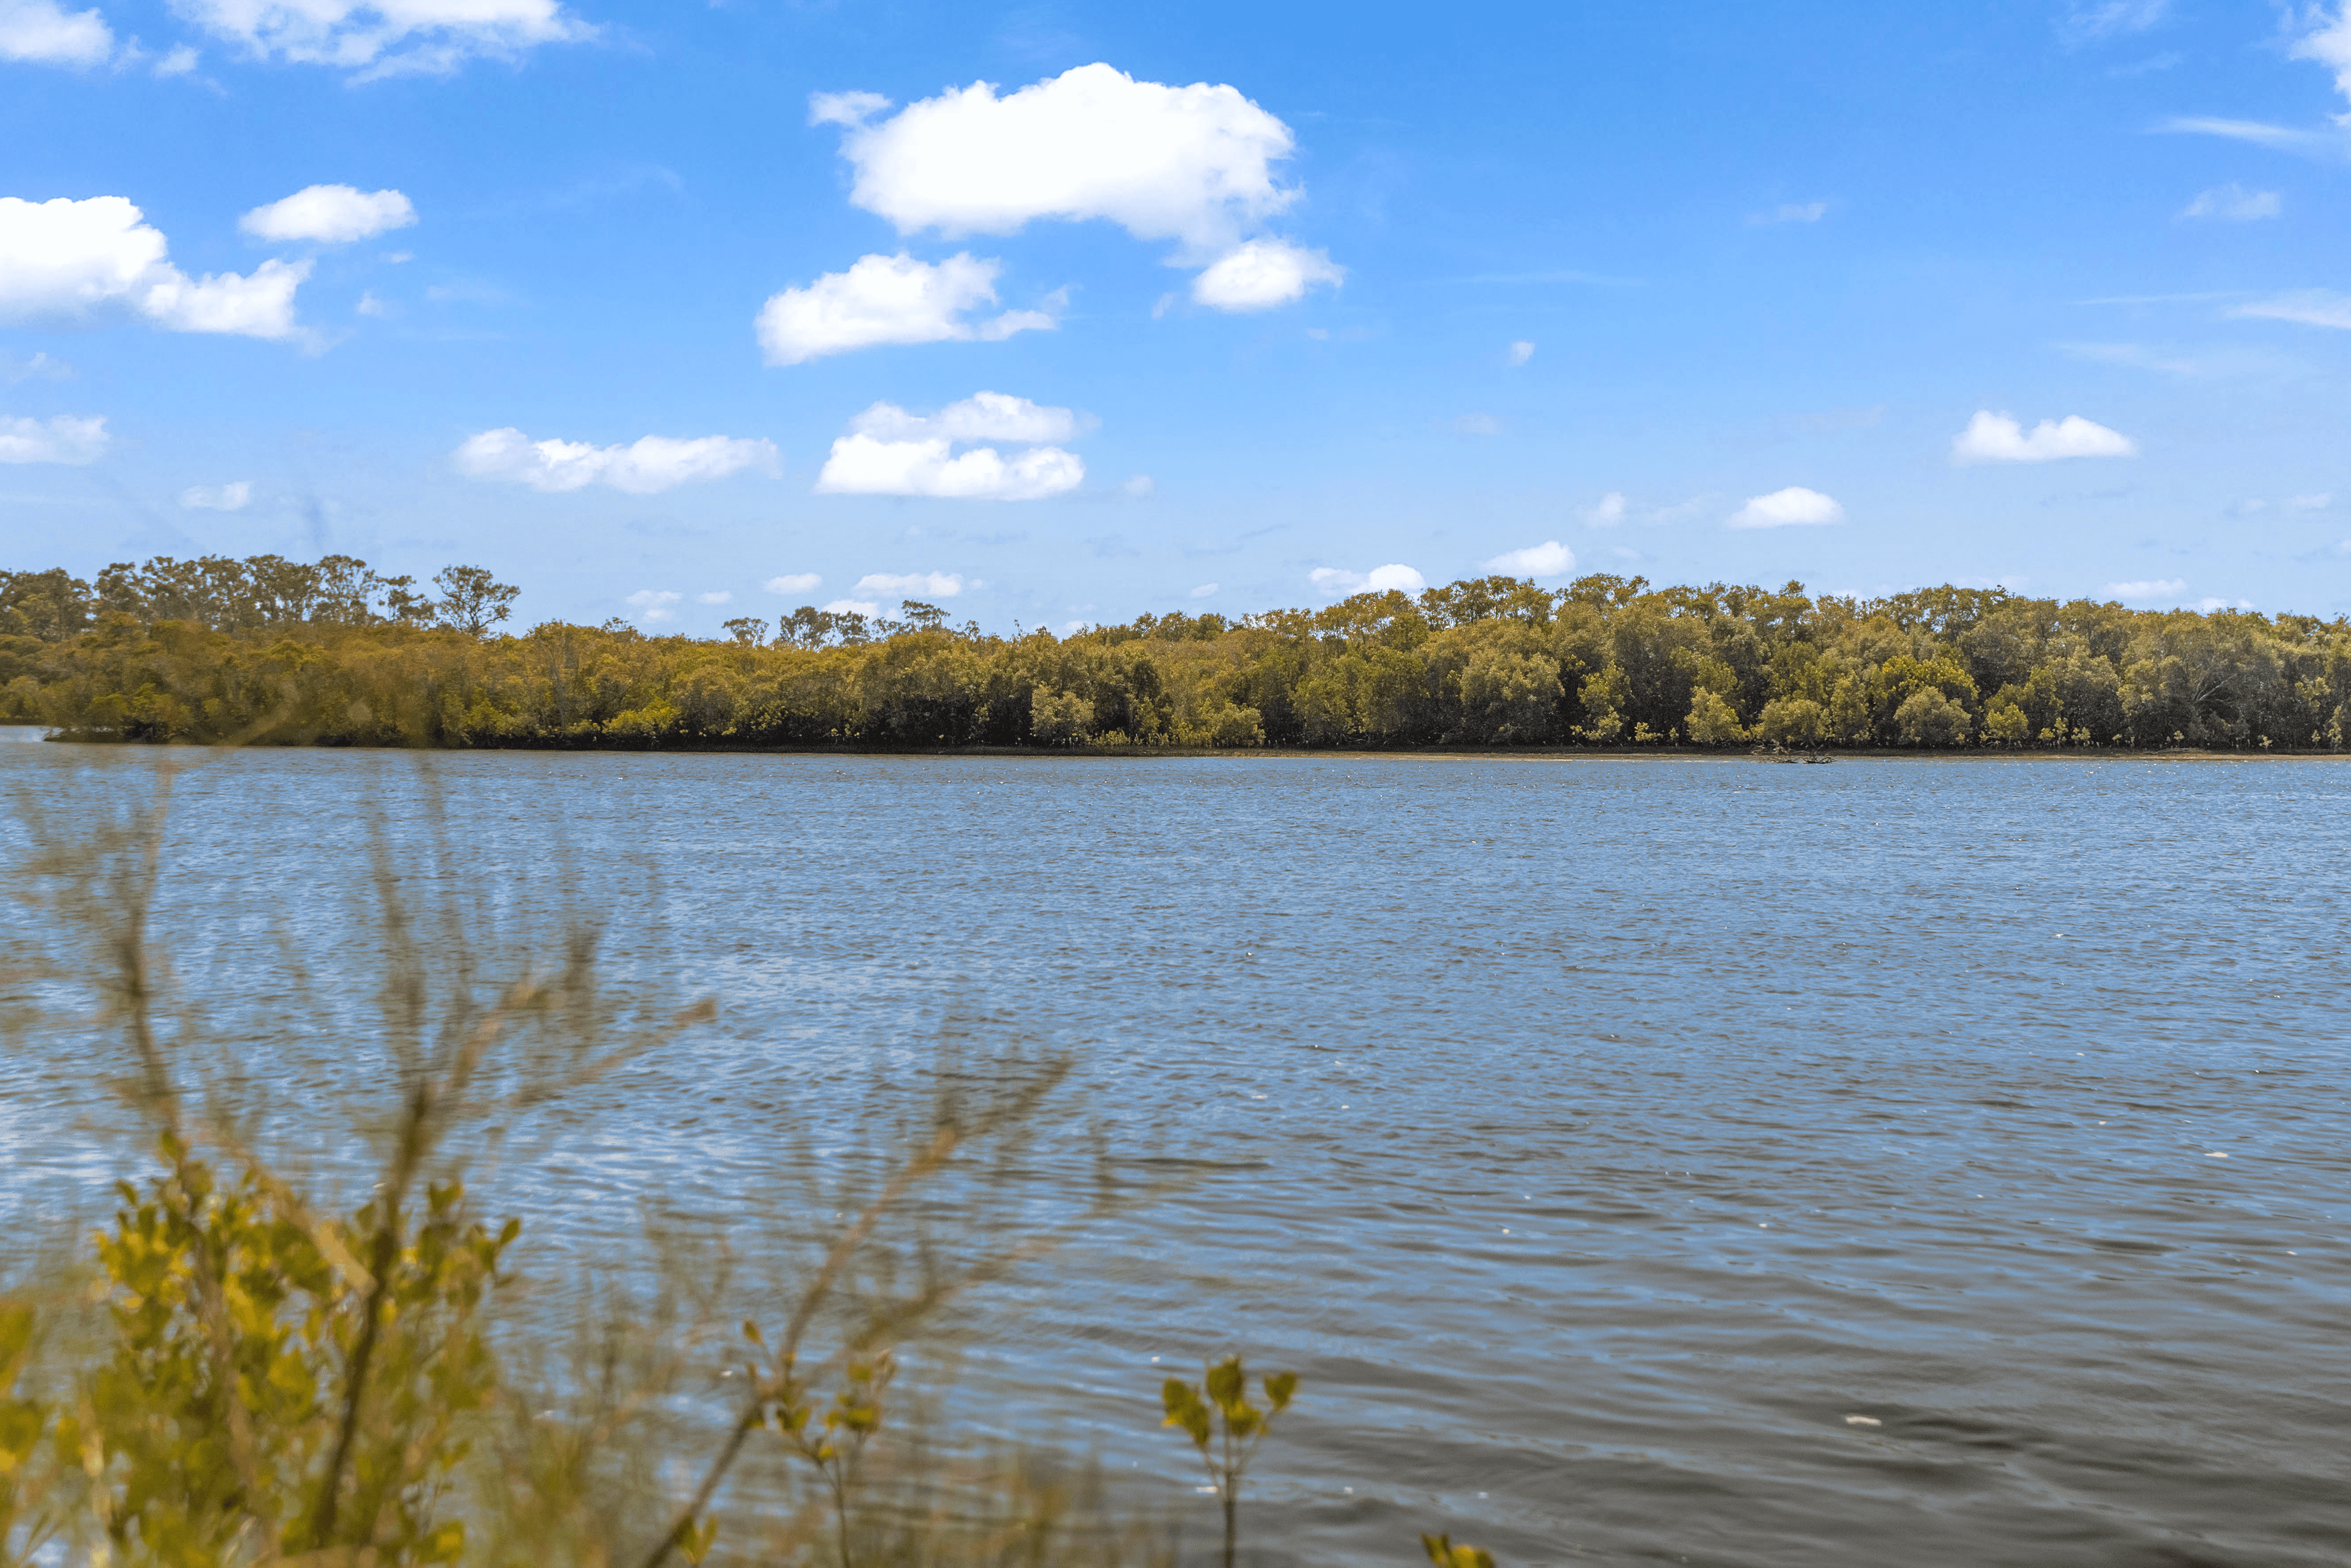 29 The Estuary, Coombabah, QLD 4216